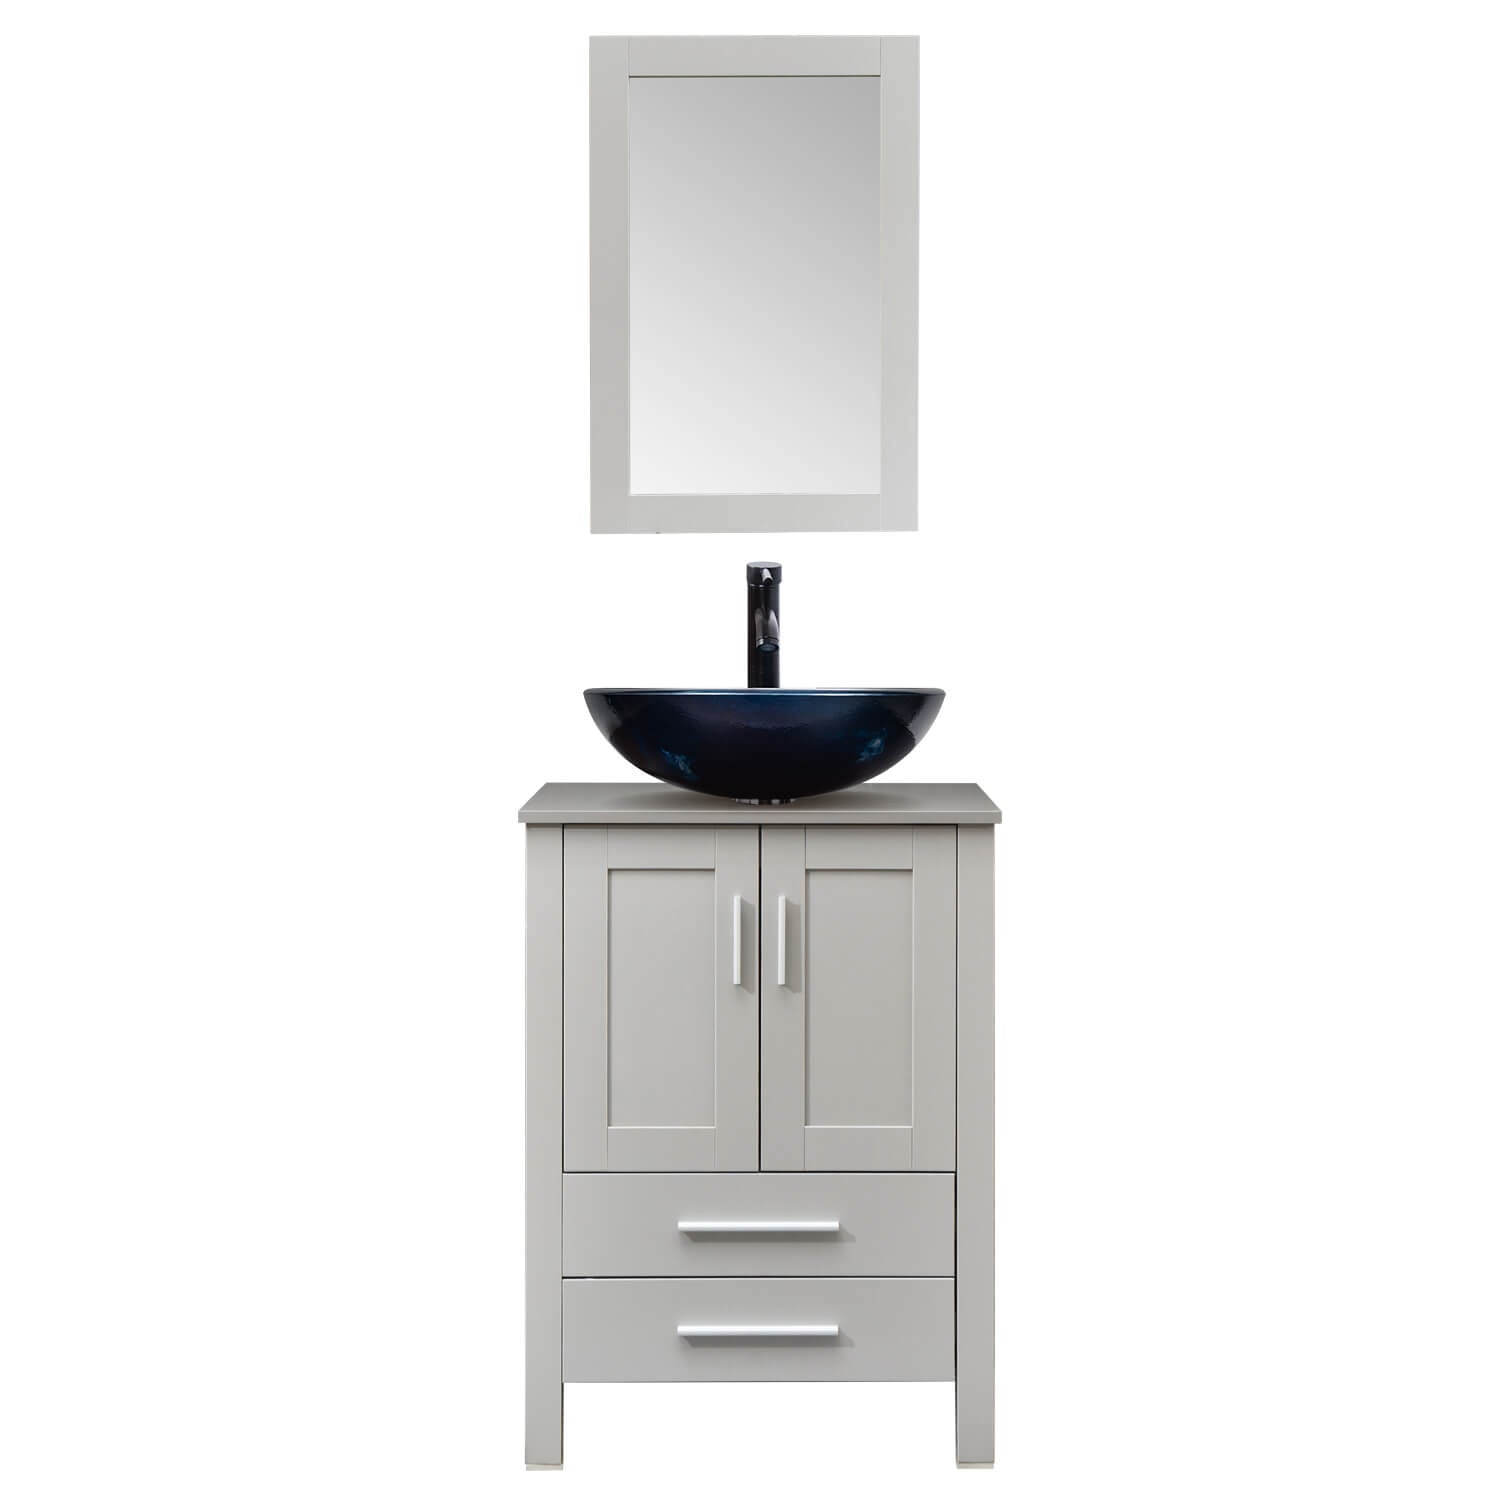 Elecwish gray wood bathroom vanity with blue glass sink BA20077 in white background